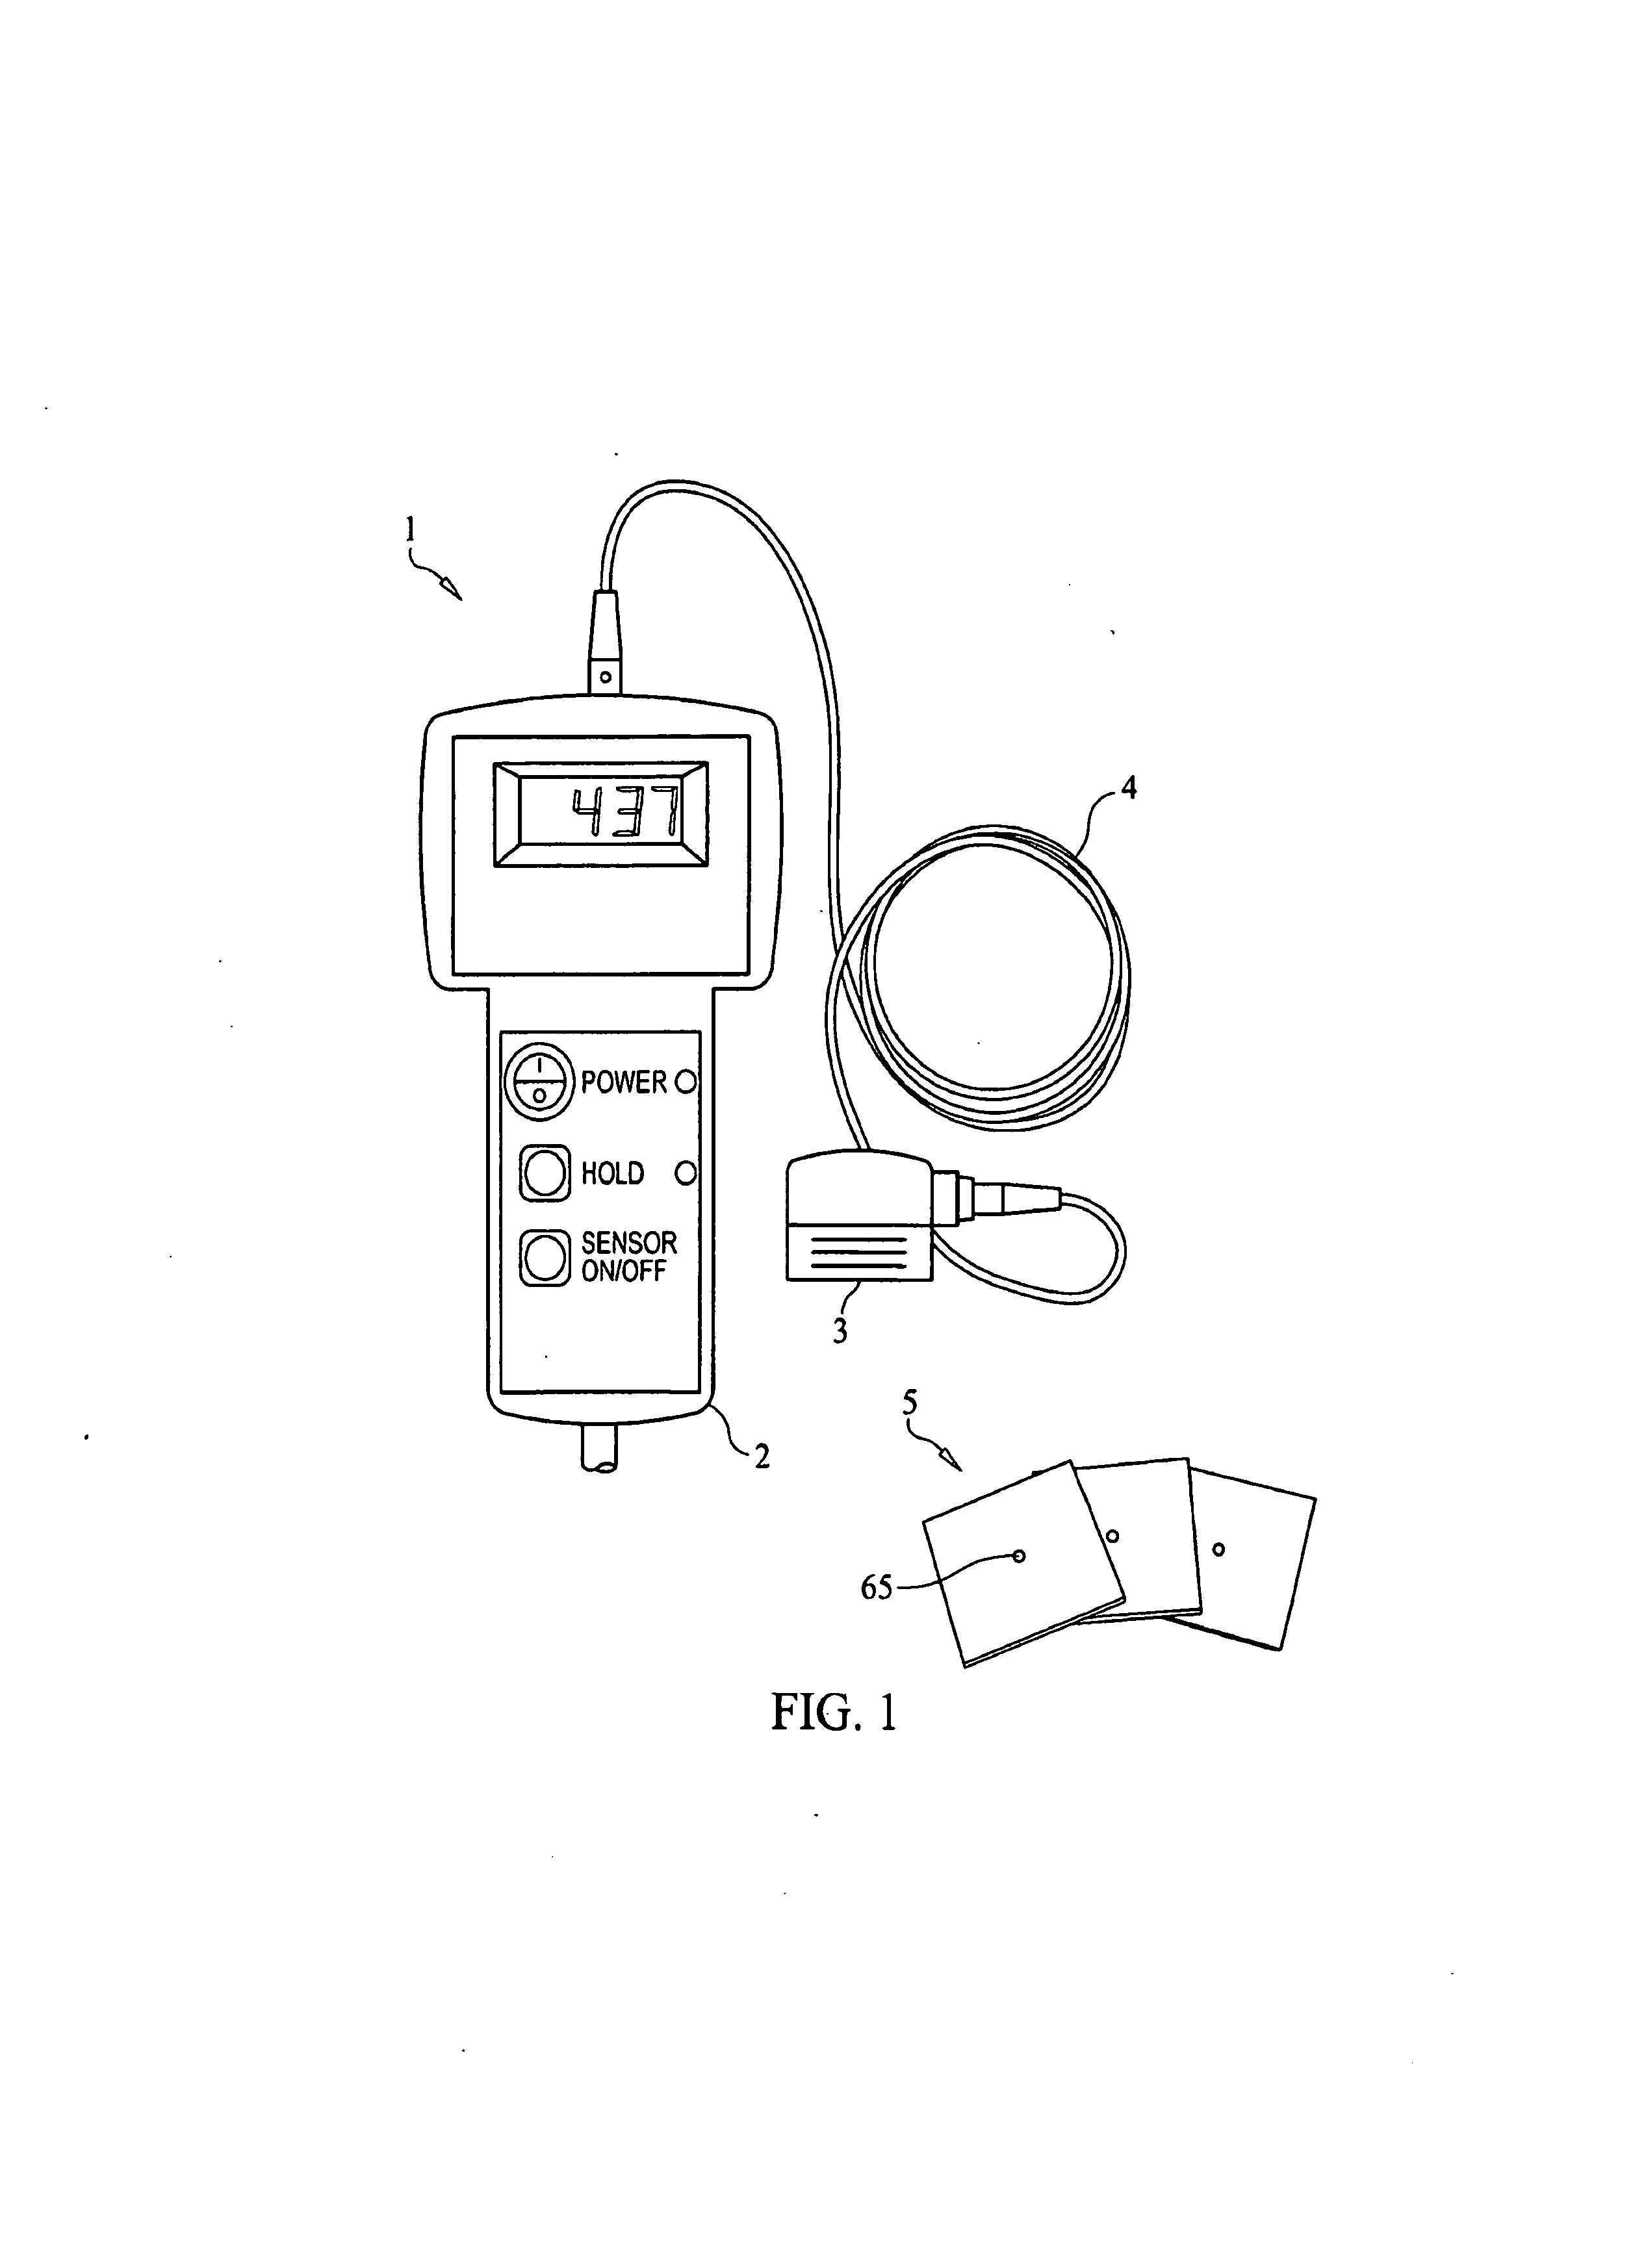 Nondestructive inspection apparatus and method for evaluating cold working effectiveness at fastener holes